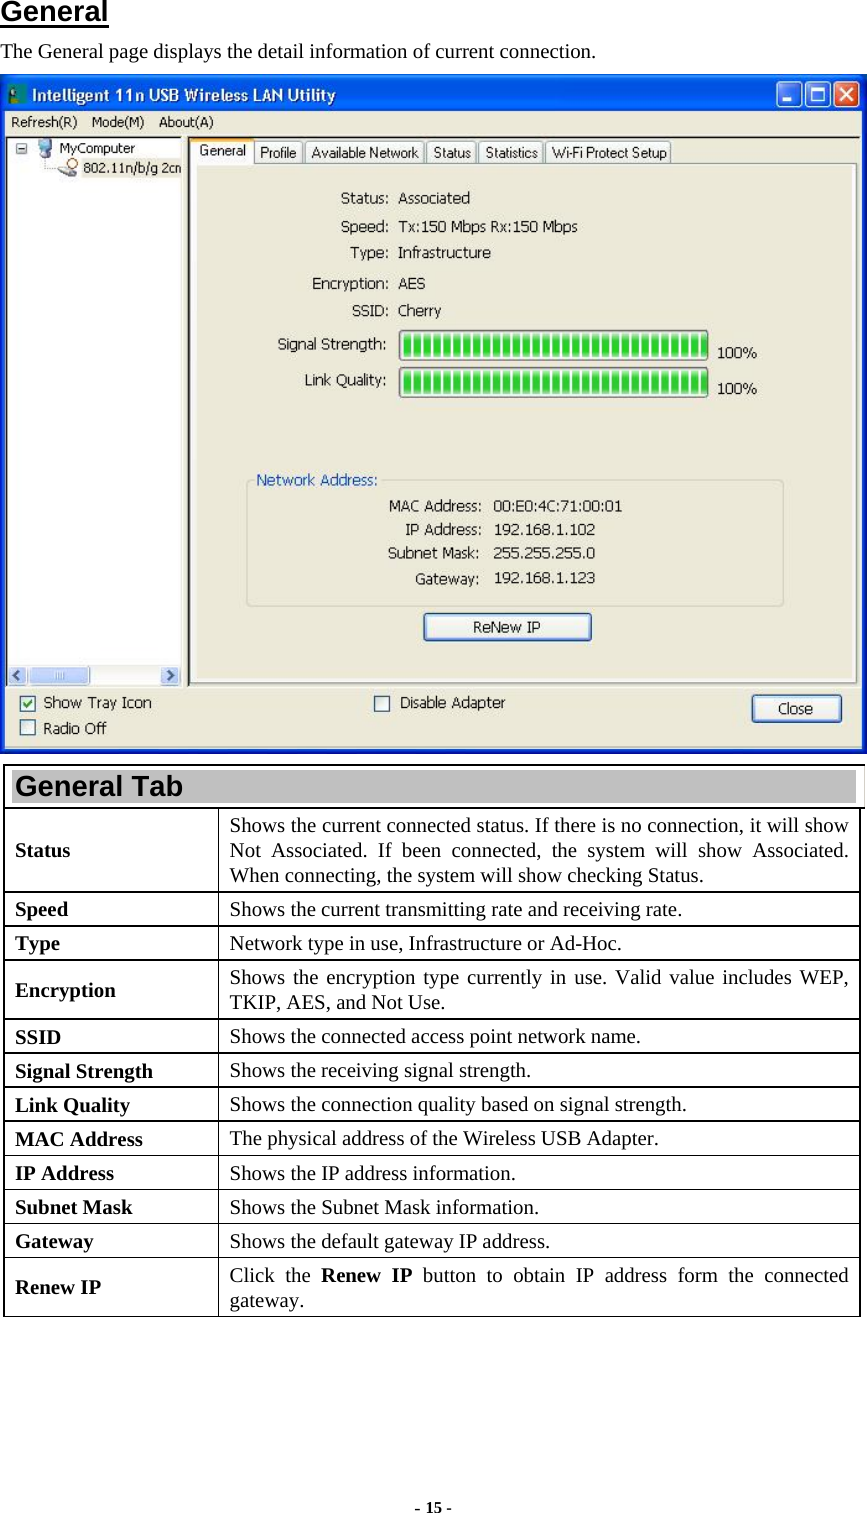  - 15 -  General The General page displays the detail information of current connection.  General Tab Status  Shows the current connected status. If there is no connection, it will show Not Associated. If been connected, the system will show Associated. When connecting, the system will show checking Status. Speed  Shows the current transmitting rate and receiving rate. Type  Network type in use, Infrastructure or Ad-Hoc. Encryption  Shows the encryption type currently in use. Valid value includes WEP, TKIP, AES, and Not Use. SSID  Shows the connected access point network name. Signal Strength  Shows the receiving signal strength. Link Quality  Shows the connection quality based on signal strength. MAC Address  The physical address of the Wireless USB Adapter. IP Address  Shows the IP address information. Subnet Mask  Shows the Subnet Mask information. Gateway  Shows the default gateway IP address. Renew IP  Click the Renew IP button to obtain IP address form the connected gateway. 